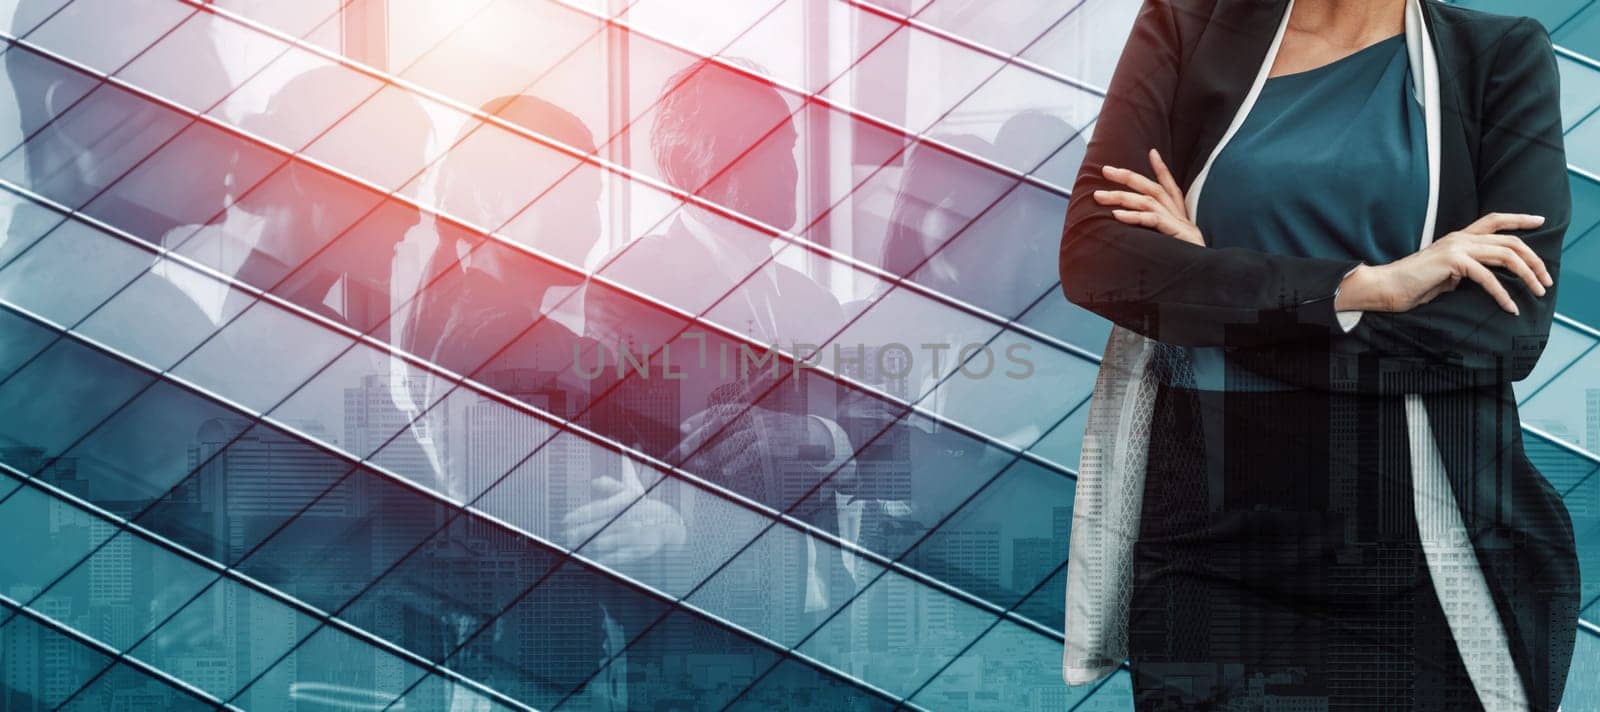 Double Exposure Image of Success Business People on abstract modern city background. Future business and communication technology concept. Surreal futuristic multiple exposure graphic interface. uds